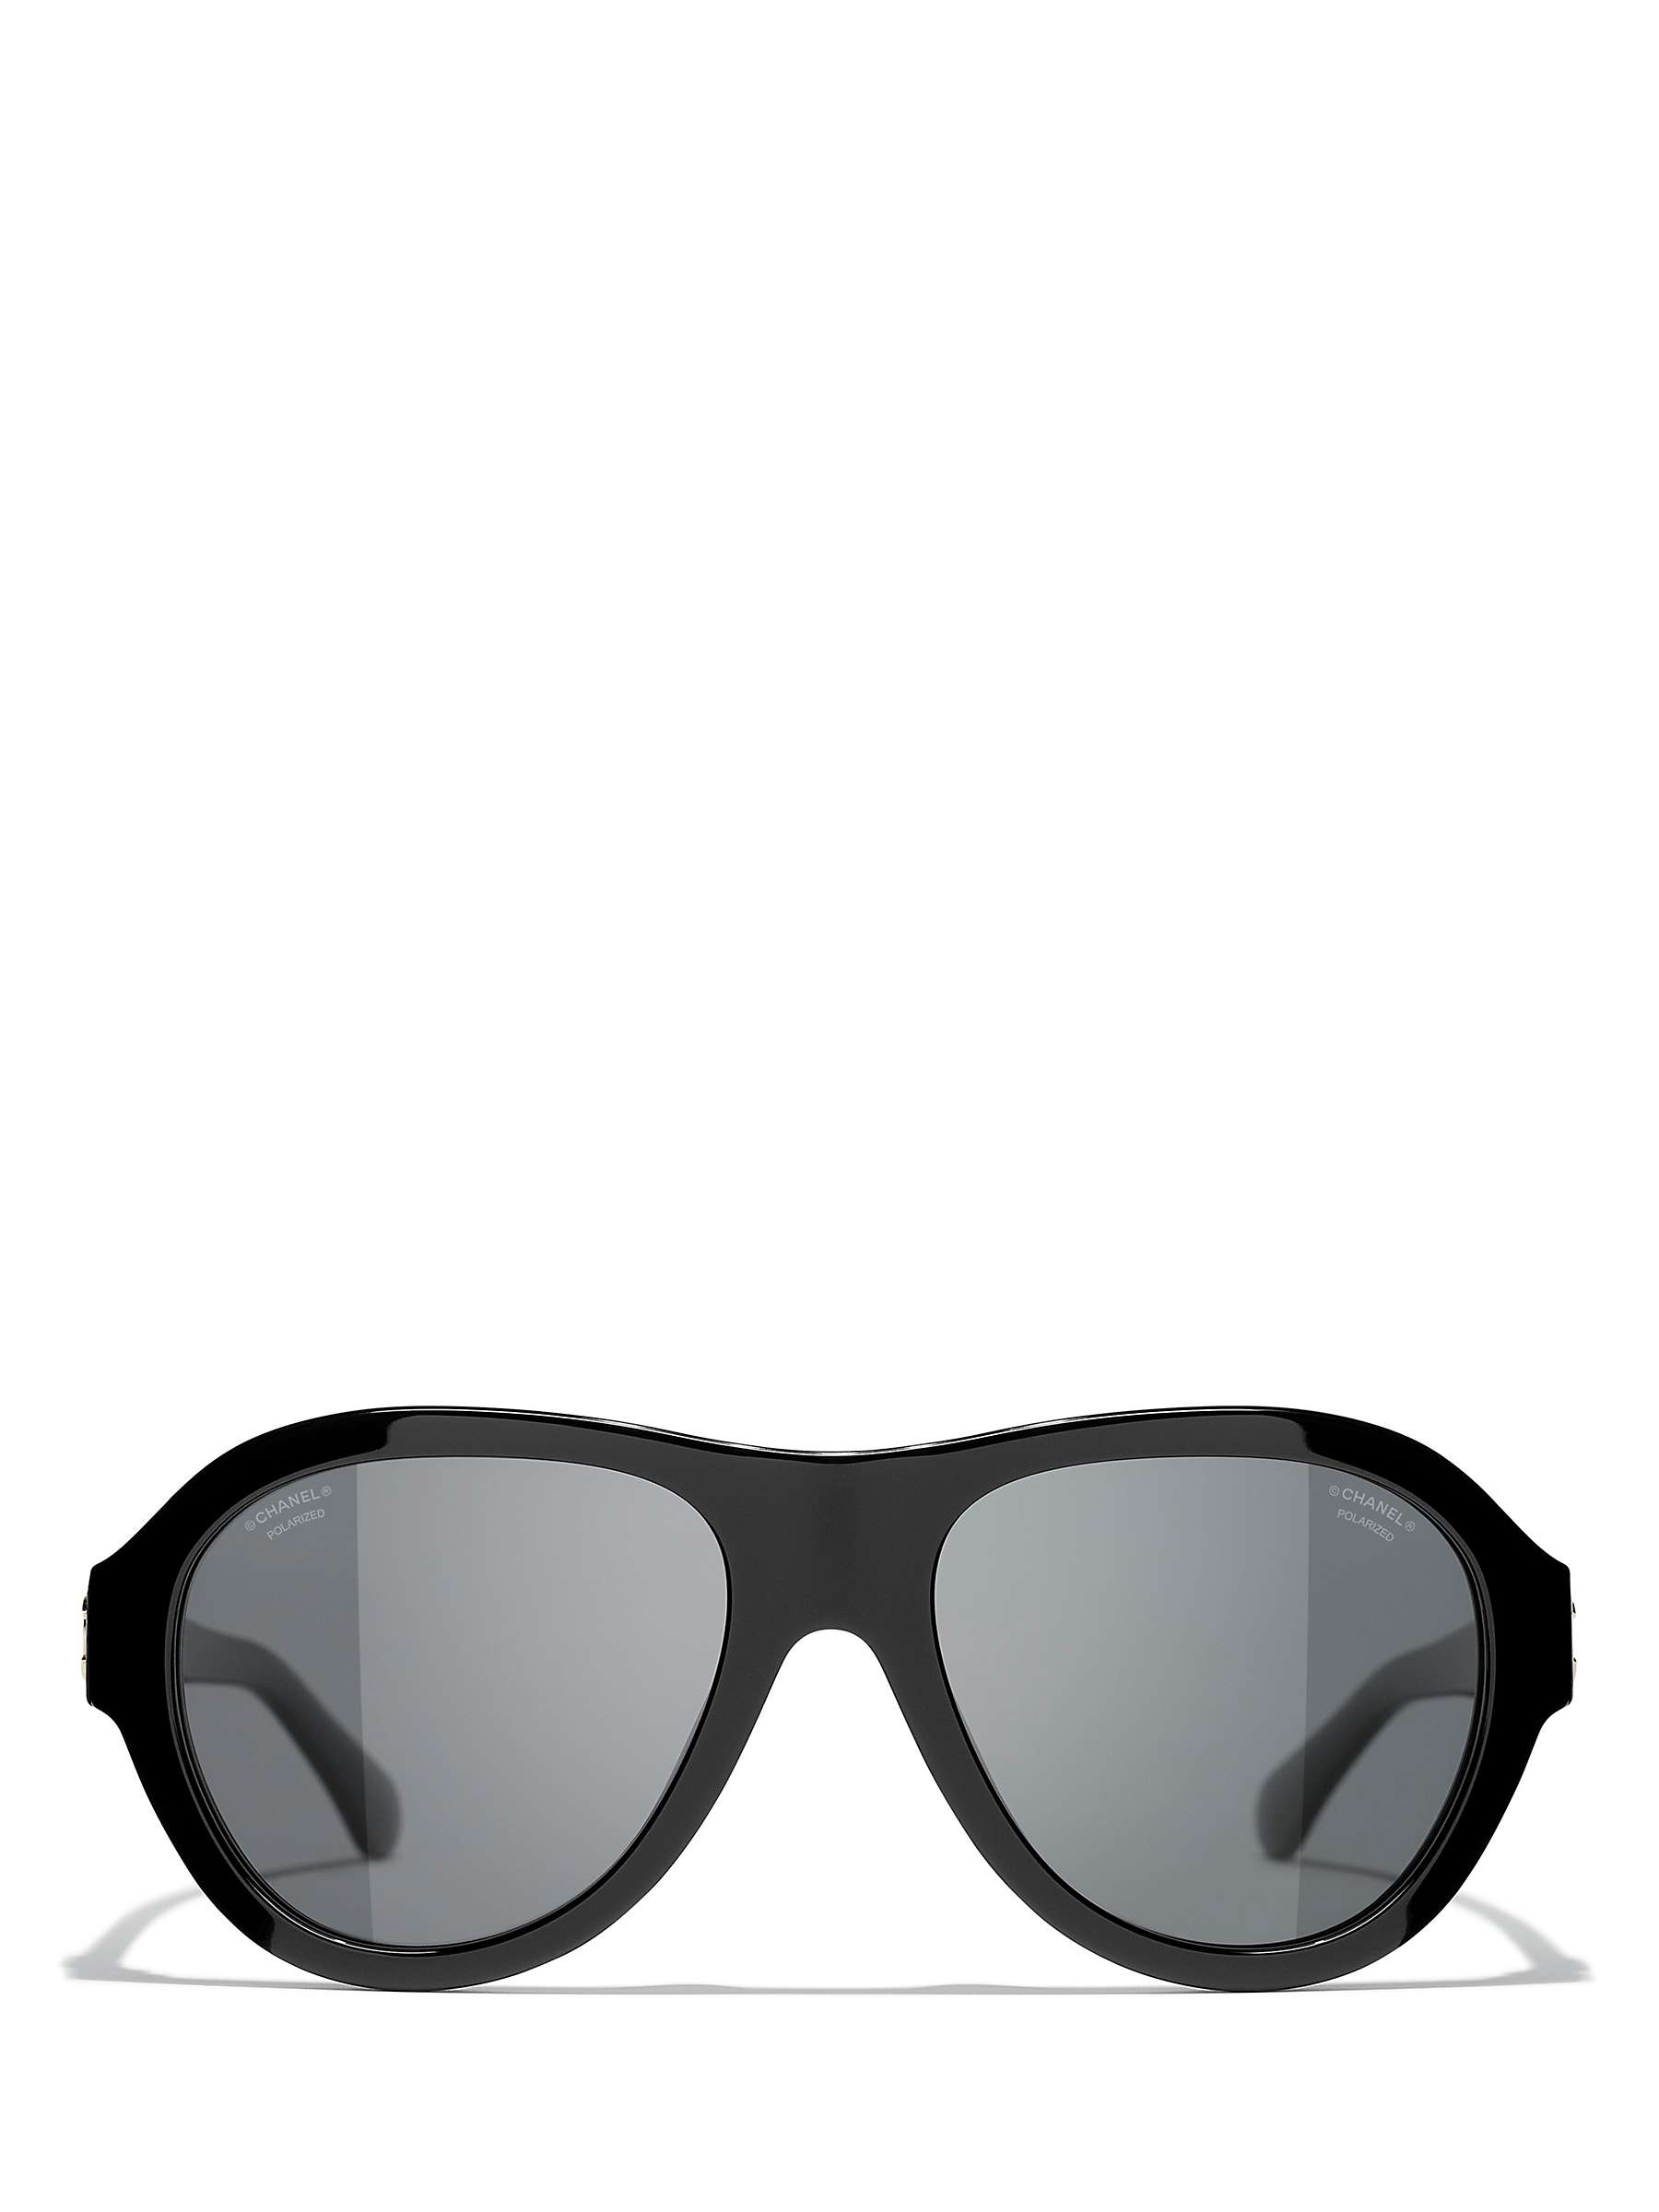 Buy CHANEL Oval Sunglasses CH5467B Black/Grey Online at johnlewis.com